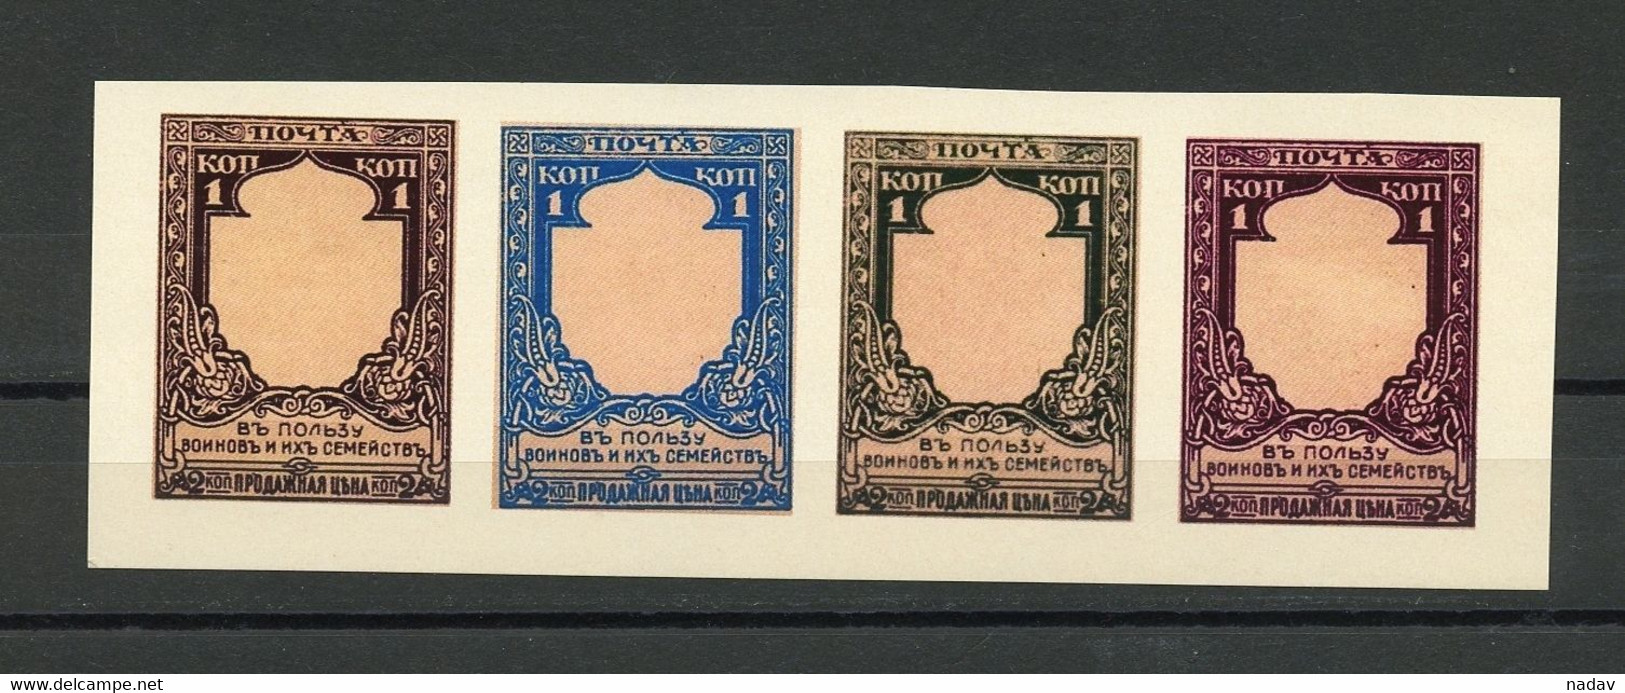 Russia -1912- Proof-1k, Imperforate, Reproduction  - MNH** - Ensayos & Reimpresiones